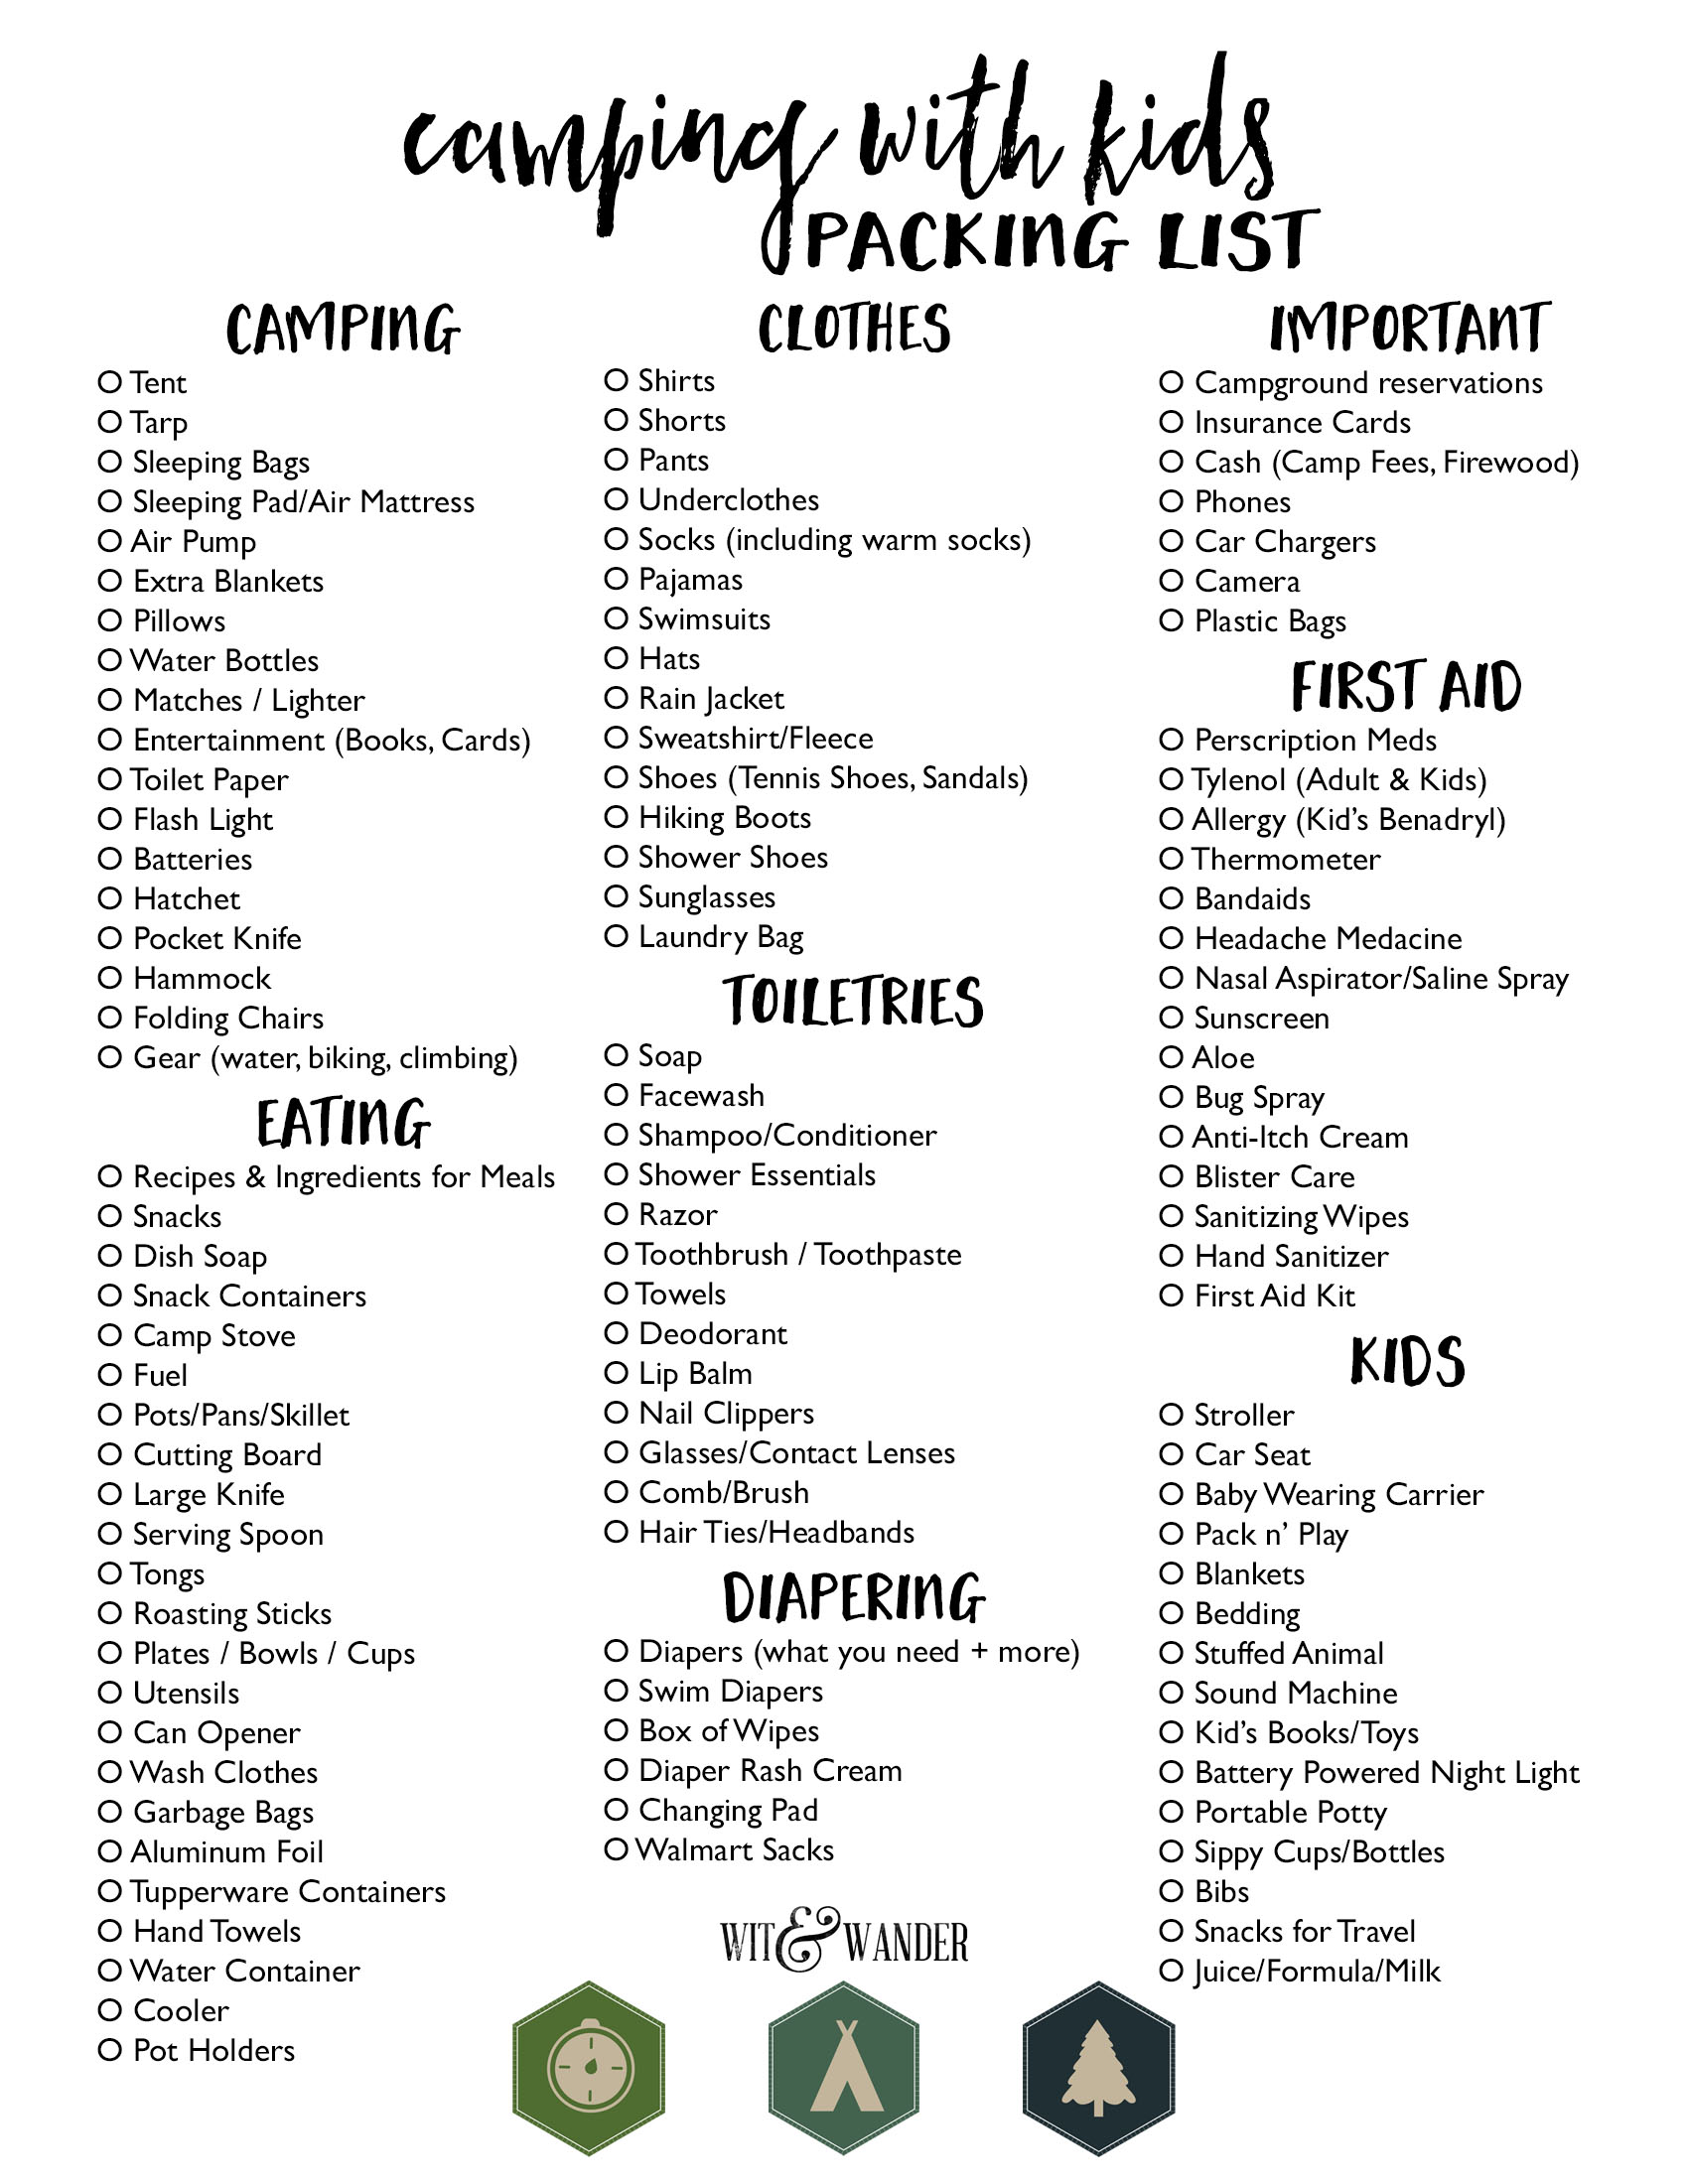 http://ourhandcraftedlife.com/wp-content/uploads/2016/07/Camping-with-Kids-Packing-List-Wit-Wander.jpg